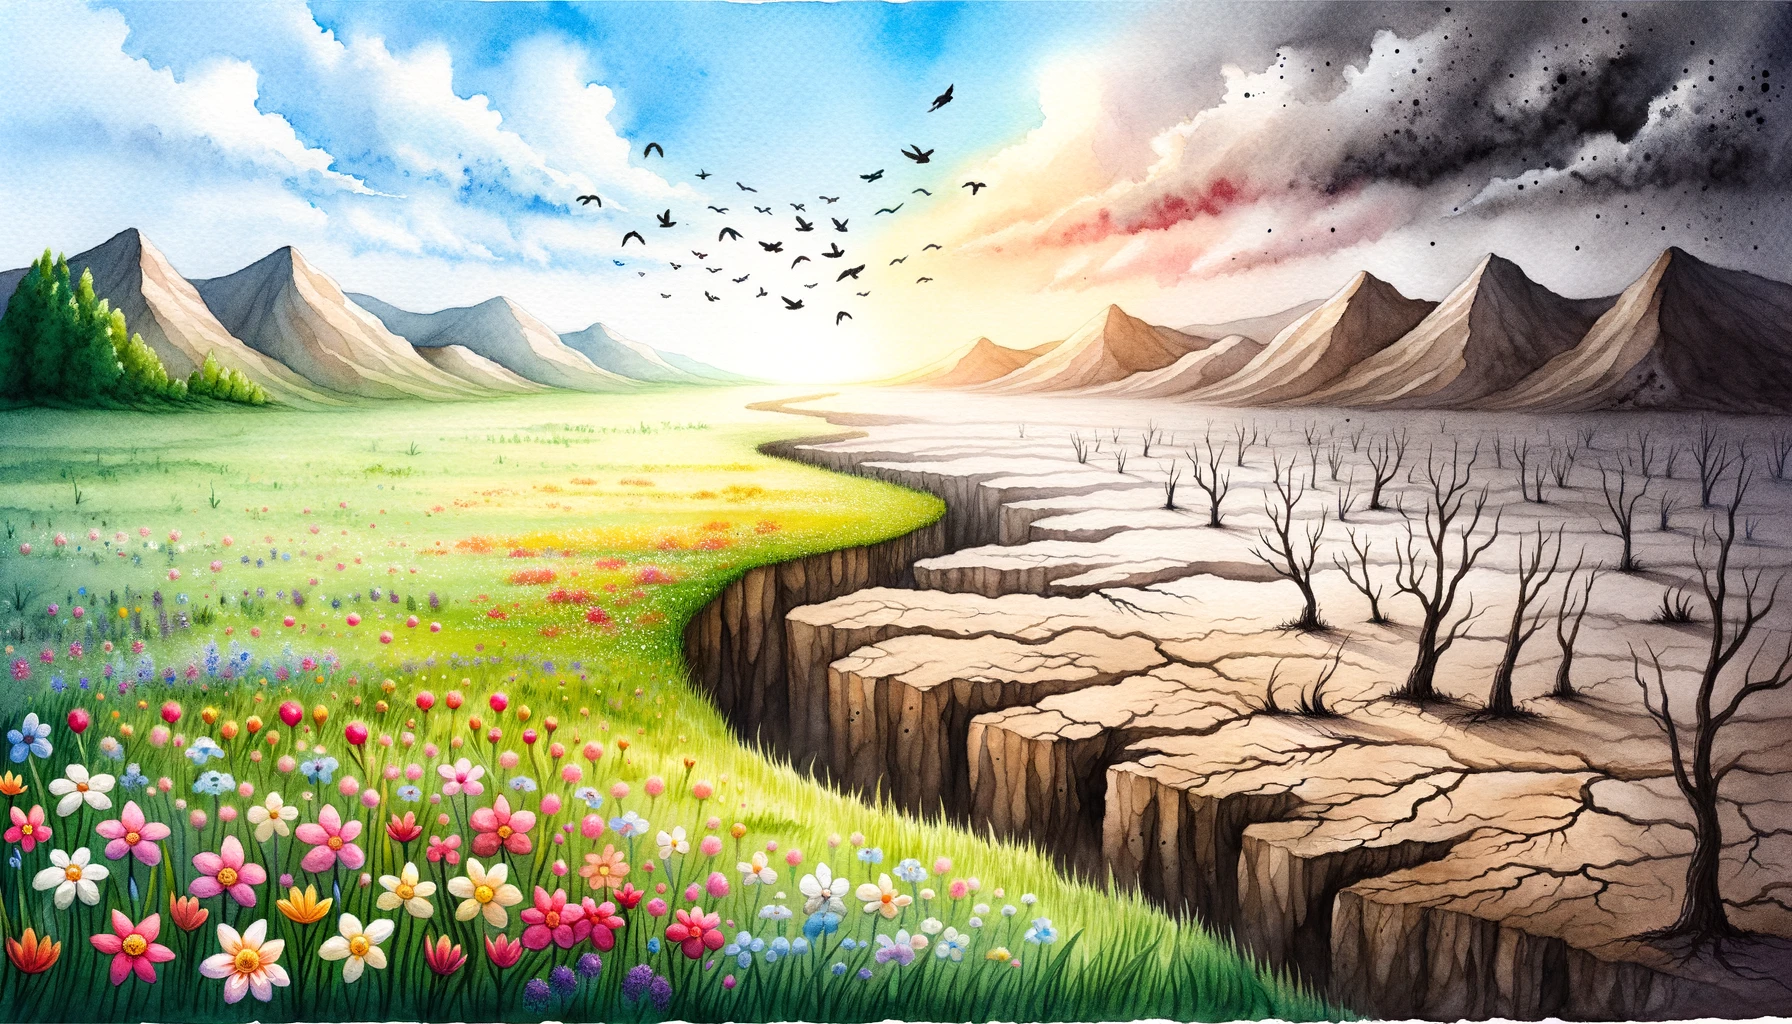 Serene meadow transitioning into a barren desert, symbolizing the duality of good and evil in the world.